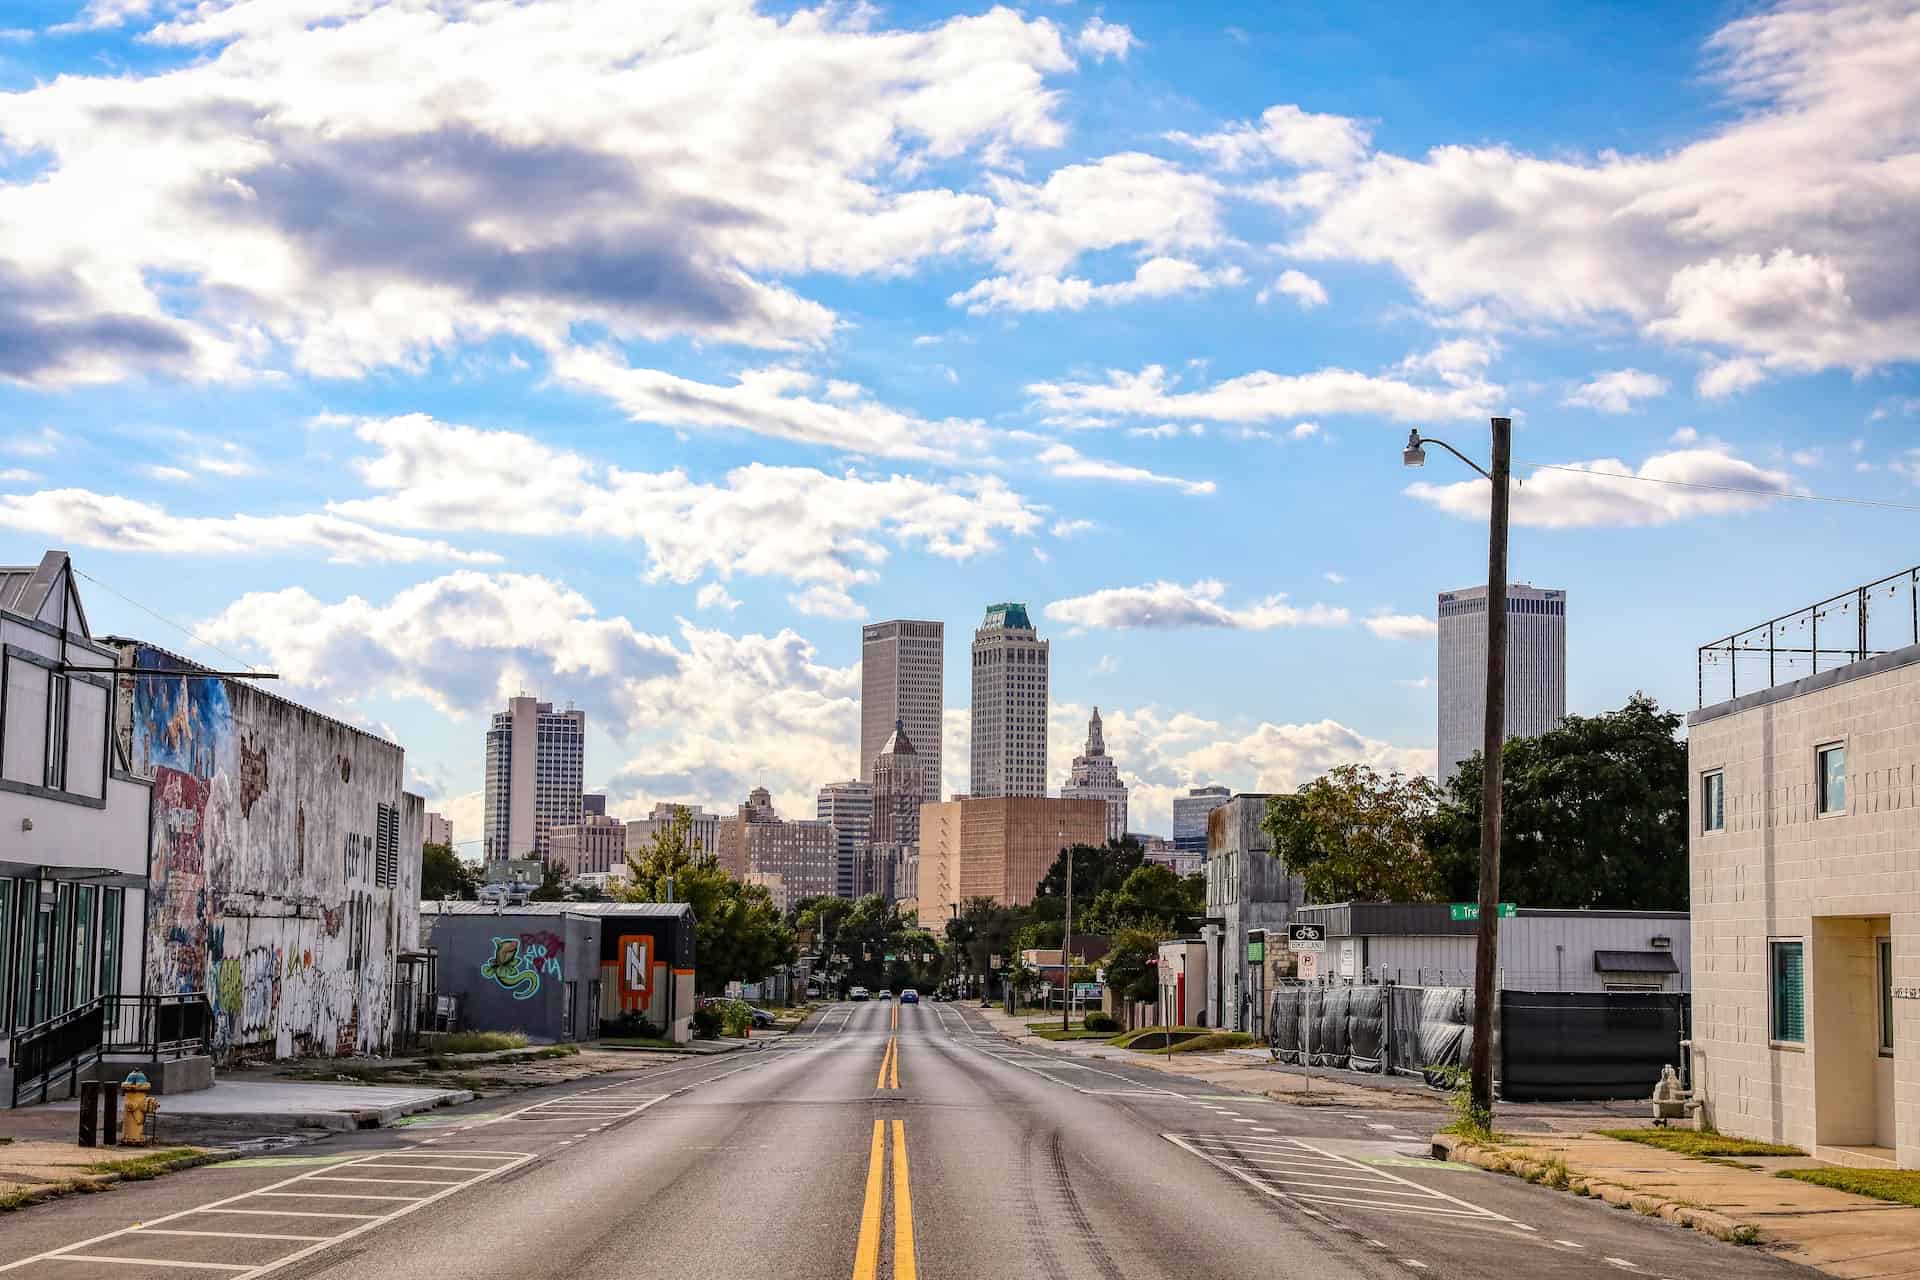 Best things to do in Tulsa Oklahoma - Kevin Matthews II - View of Tulsa skyline by Mick Haupt on Unsplash